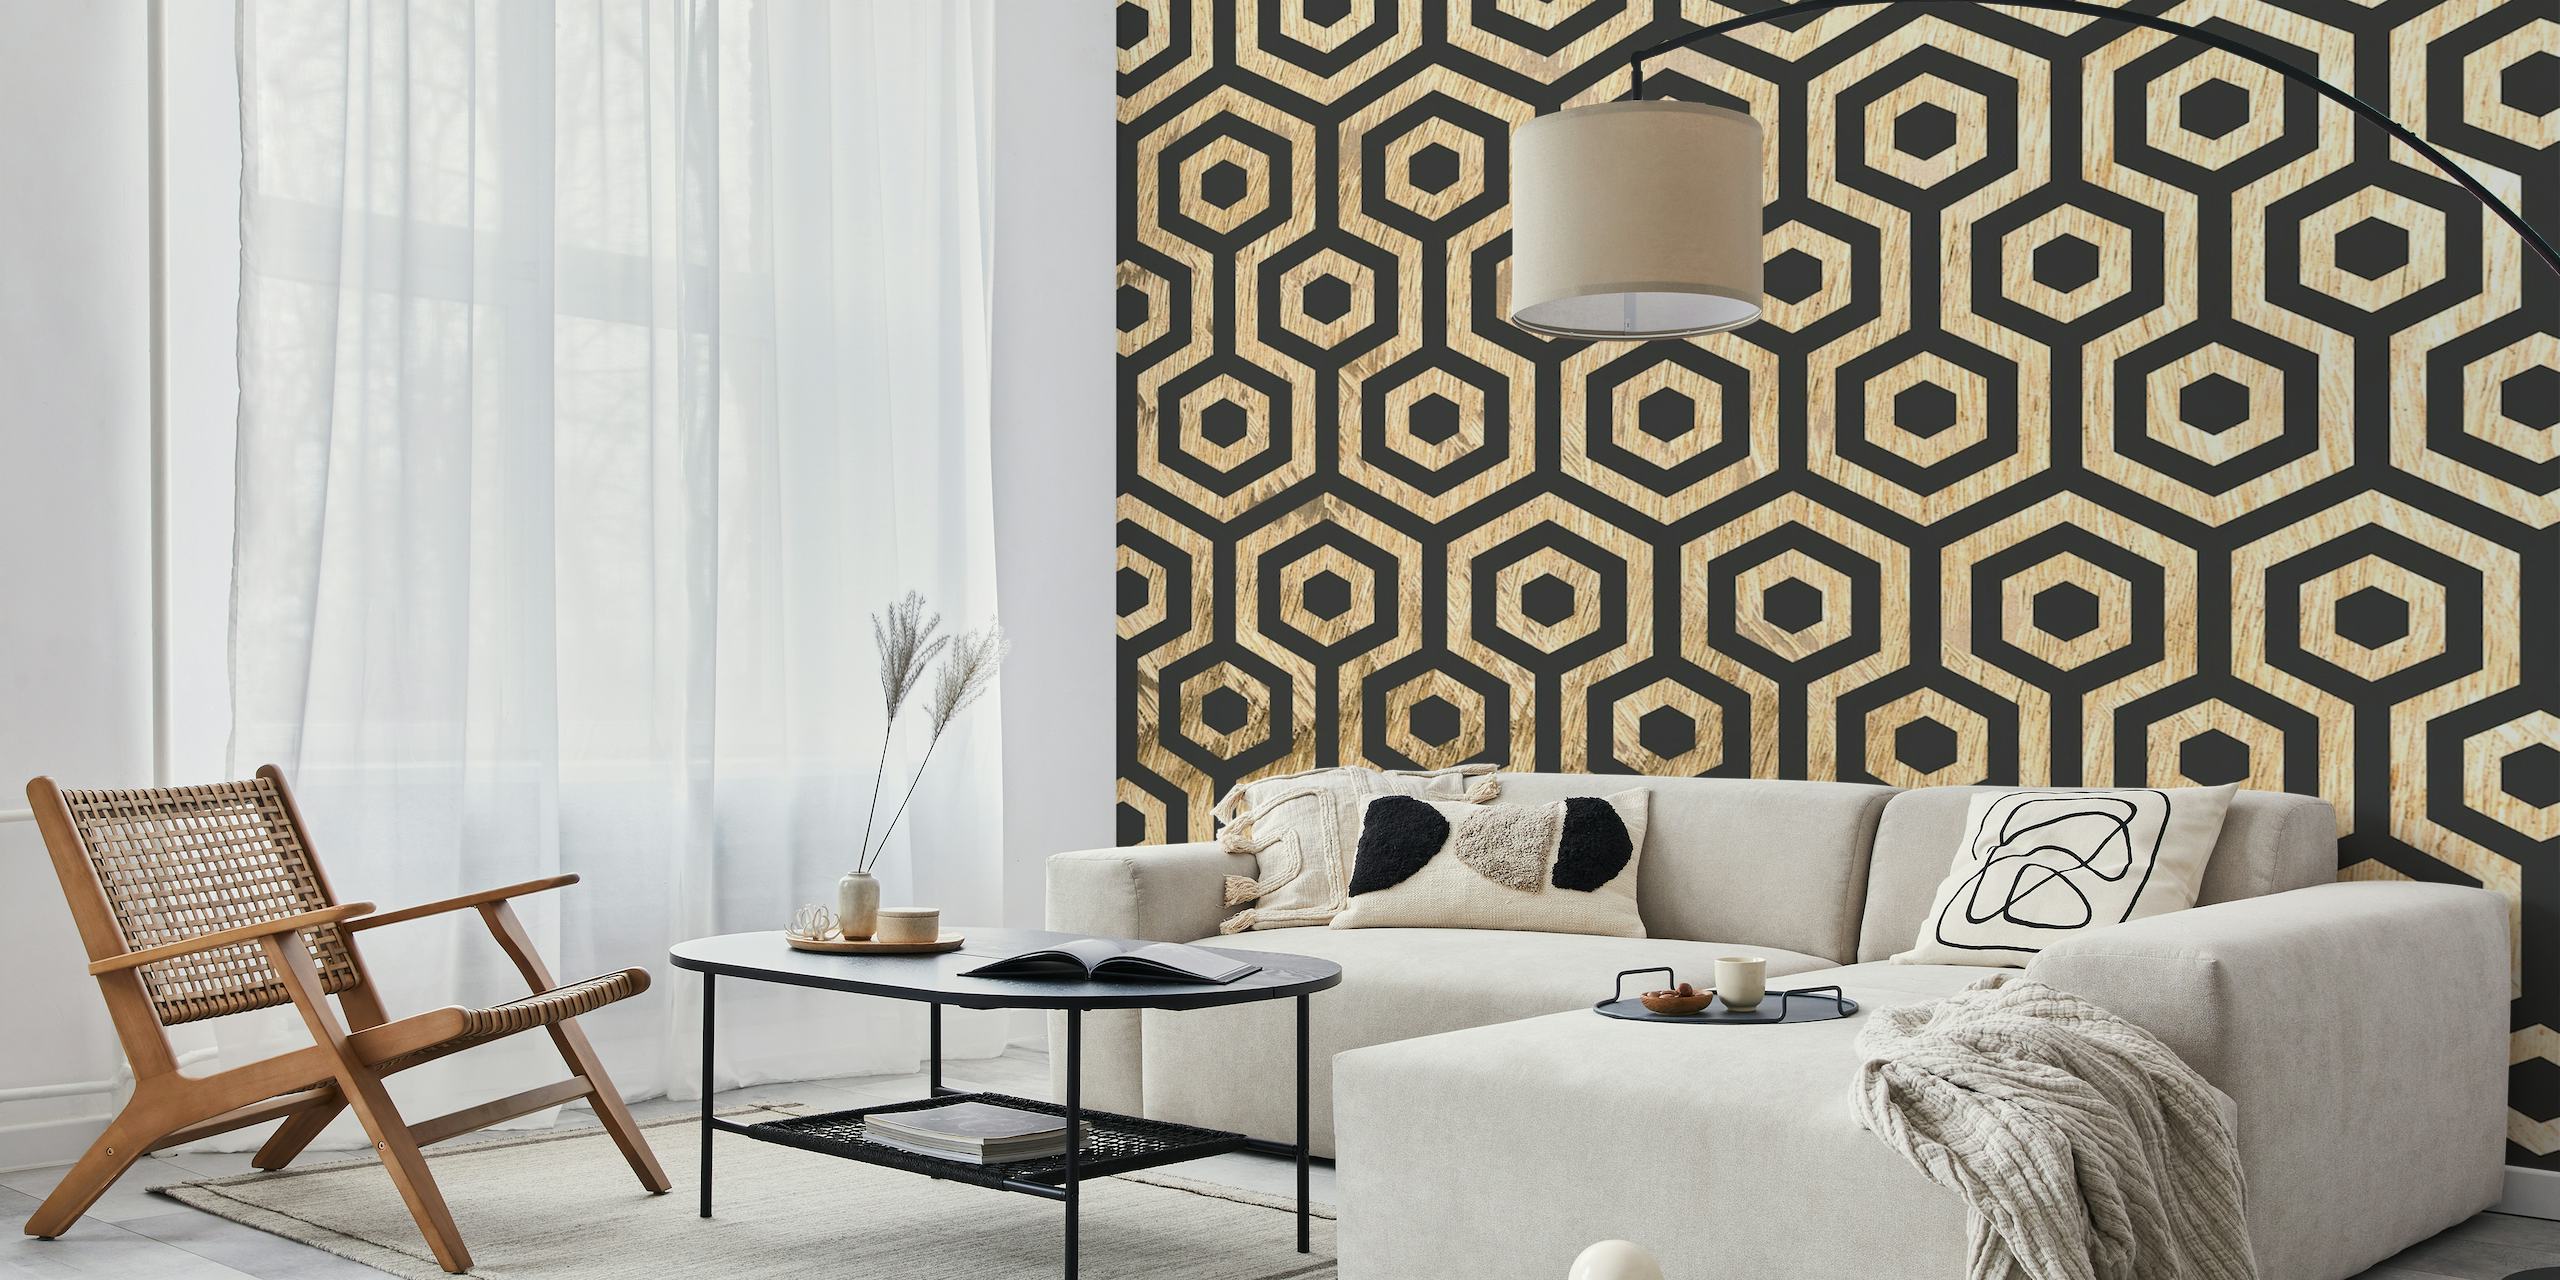 Wood Texture Hexagon Damask wall mural with geometric patterns in natural wooden hues